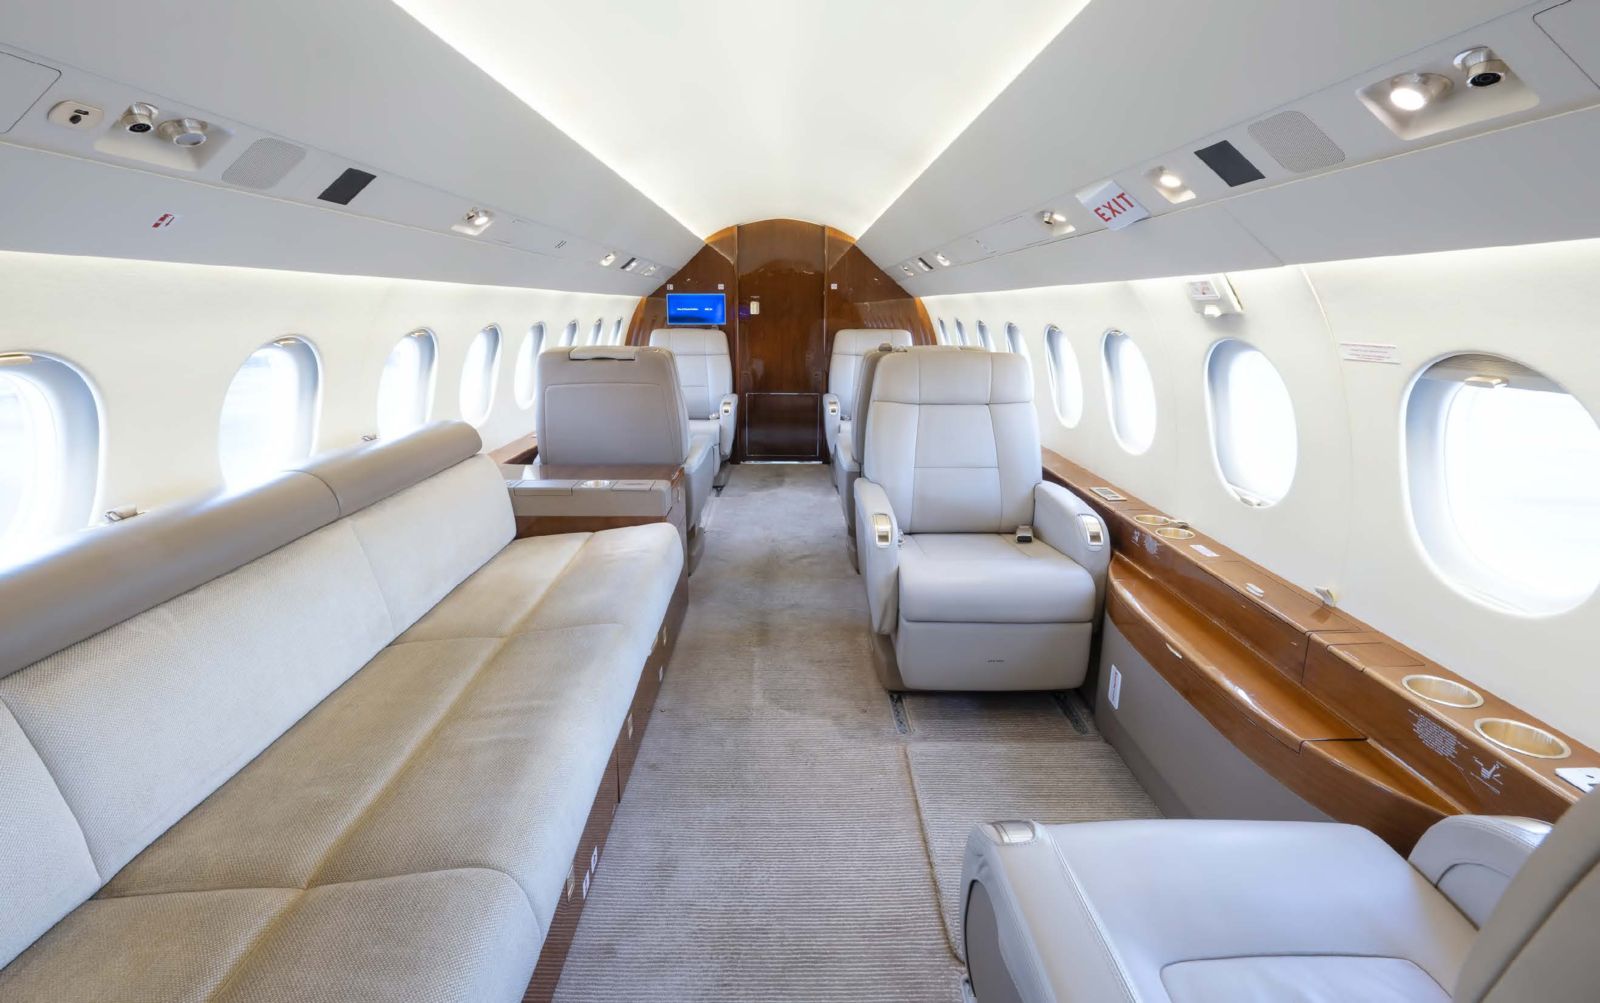 Dassault Falcon 2000LX  S/N 256 for sale | gallery image: /userfiles/files/3.jpg